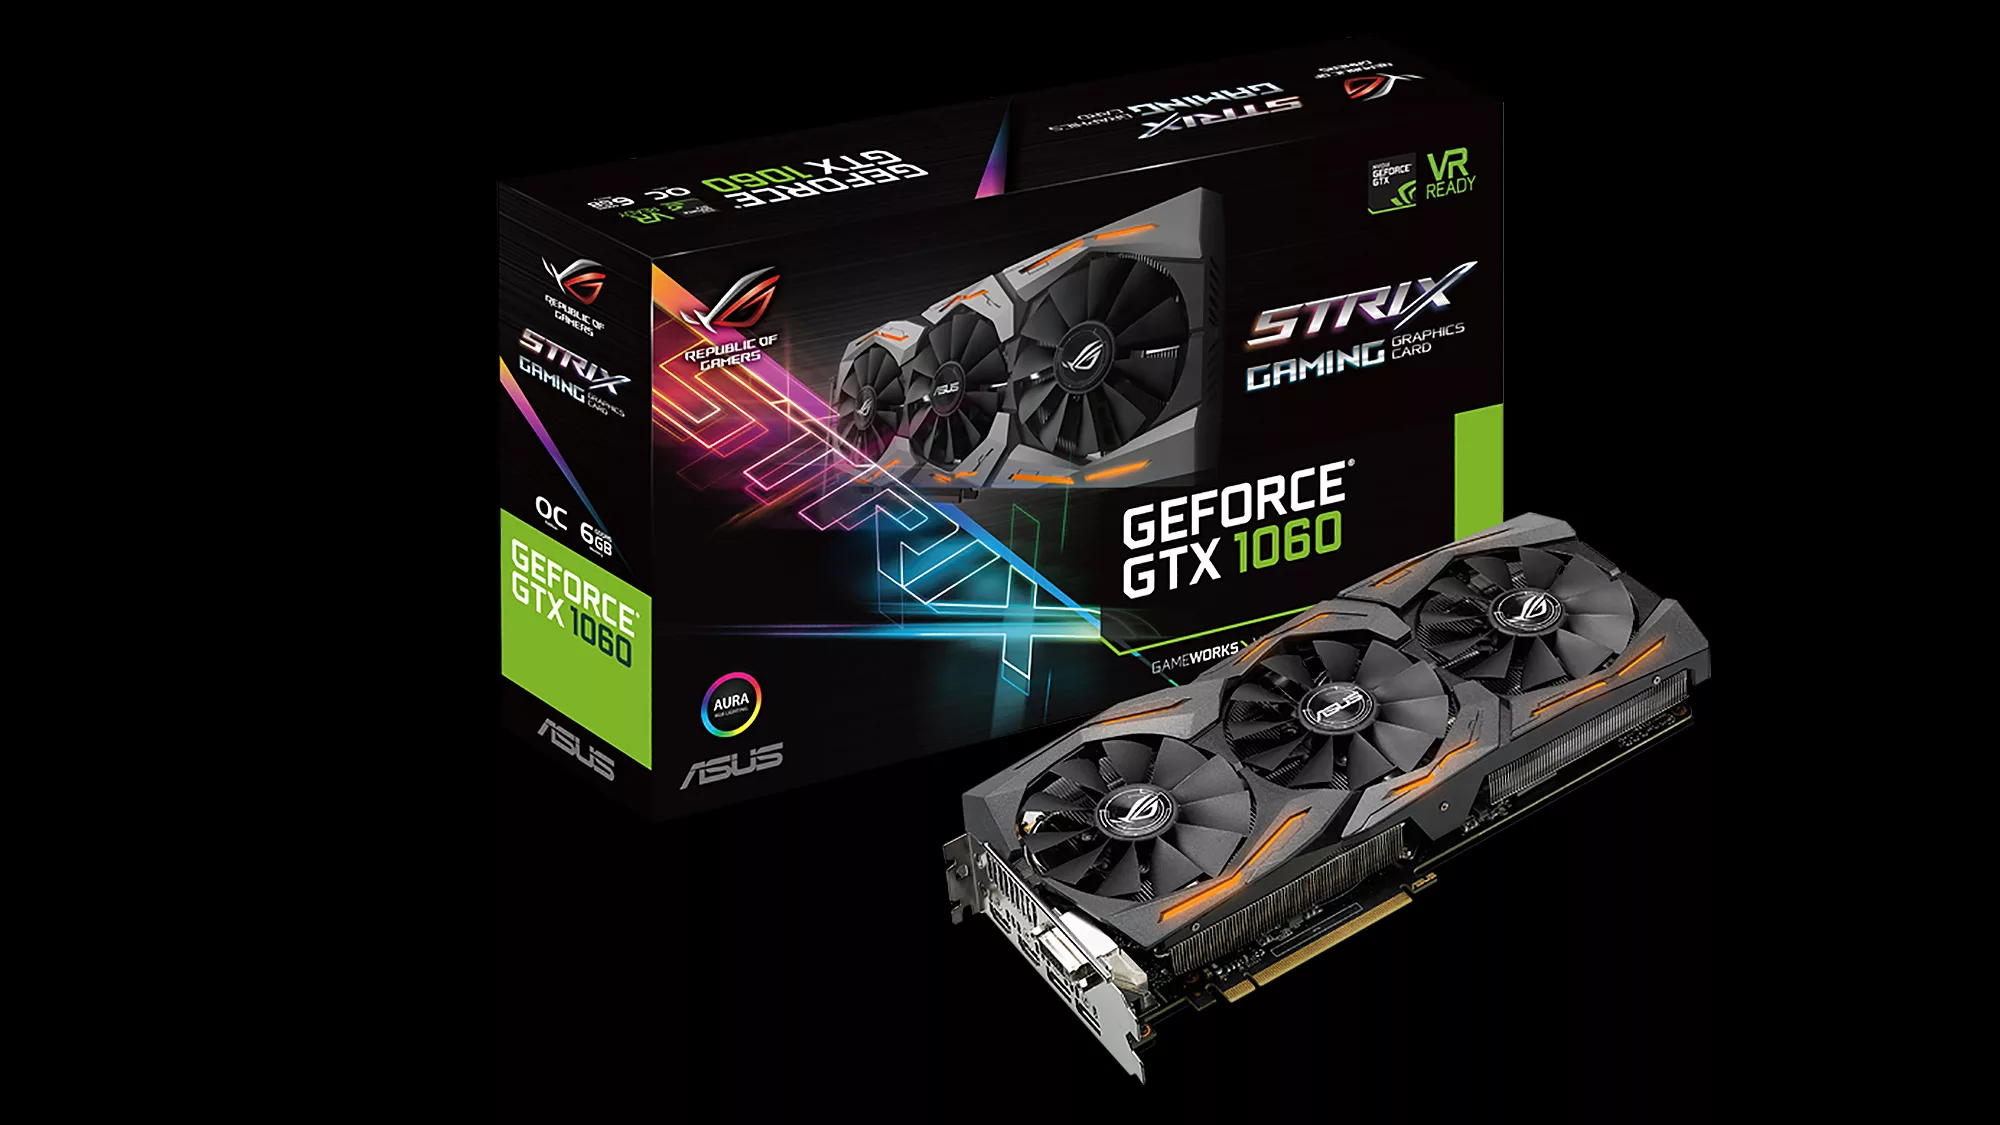 ROG Strix GTX 1060 review and gaming performance tested by meankeys ROG - of Global